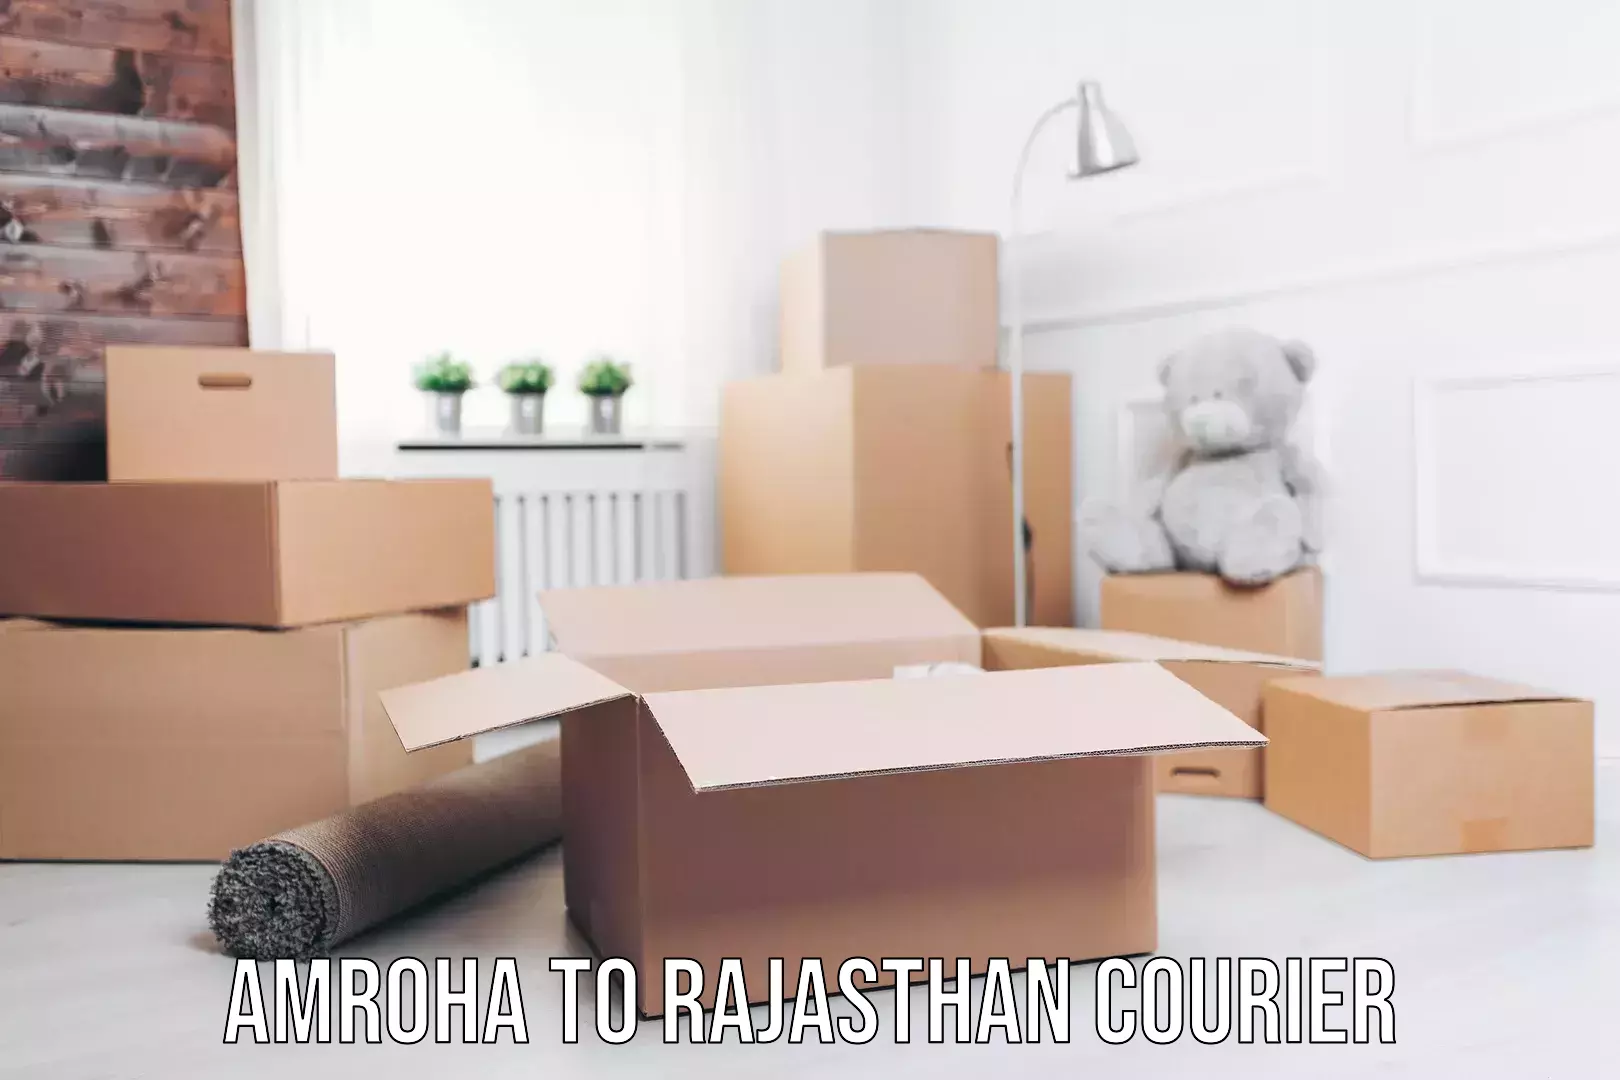 Efficient order fulfillment Amroha to Rajasthan